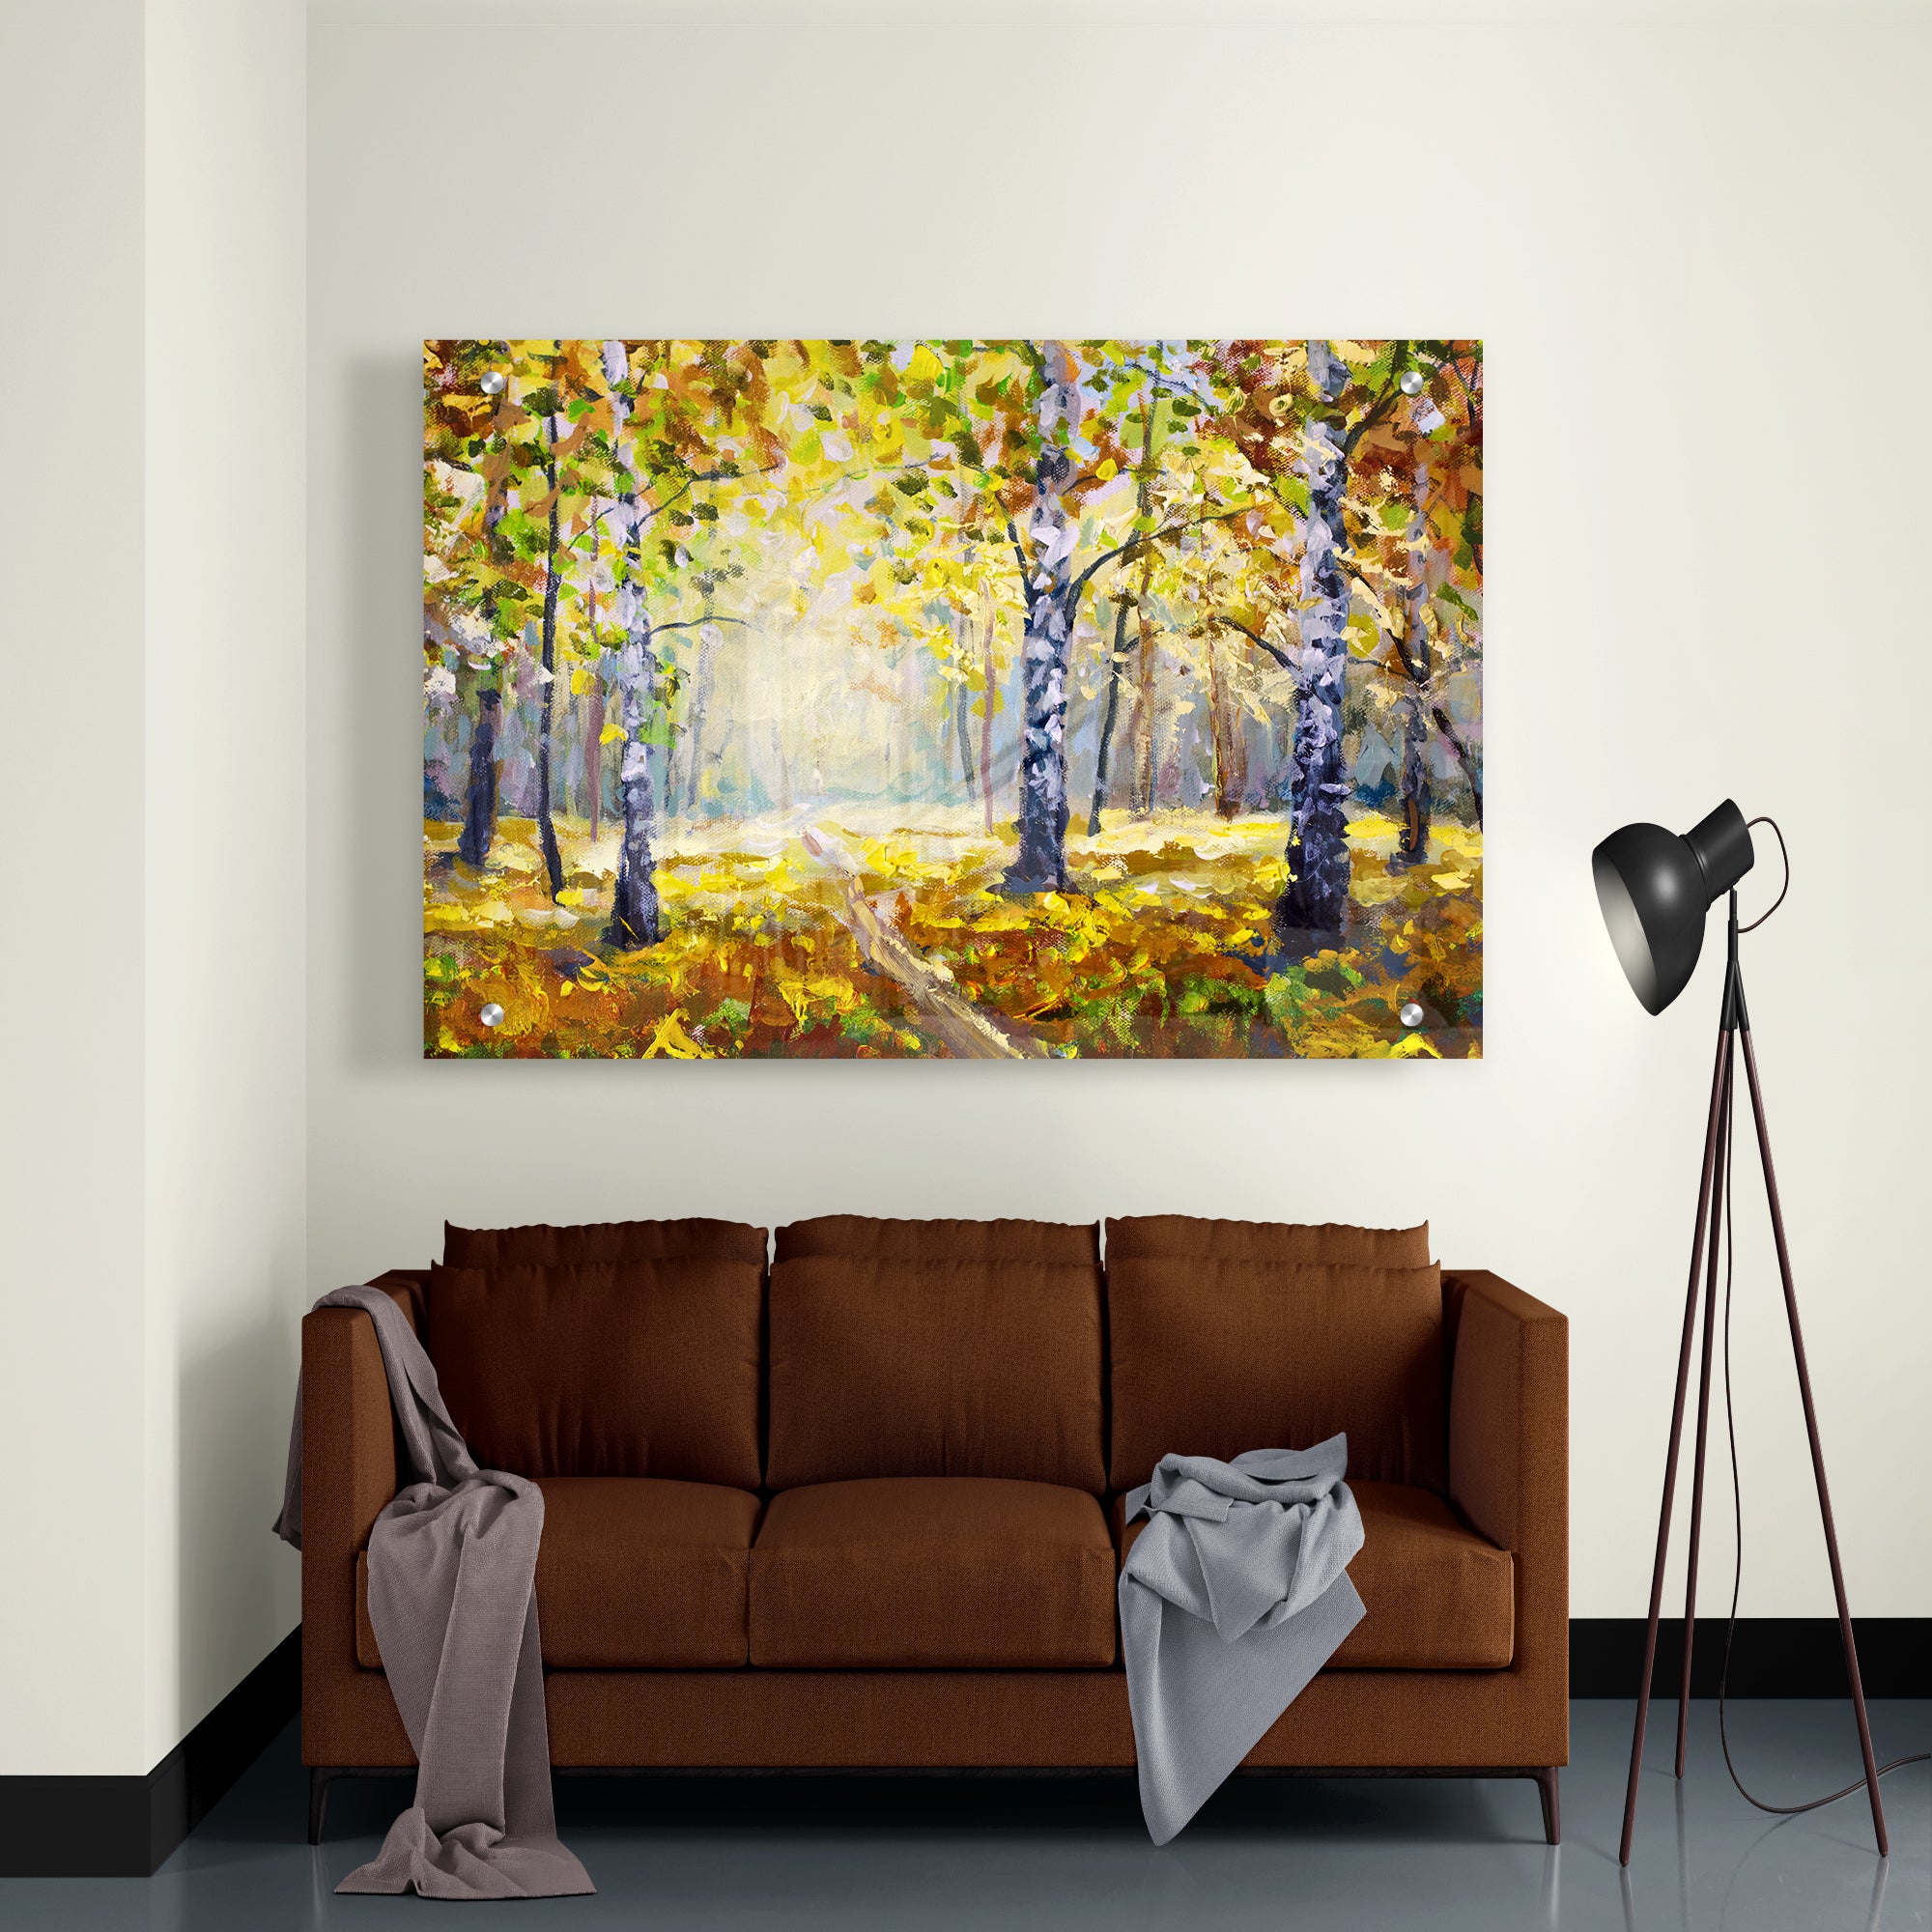 The Rain Forest Acrylic Wall Painting